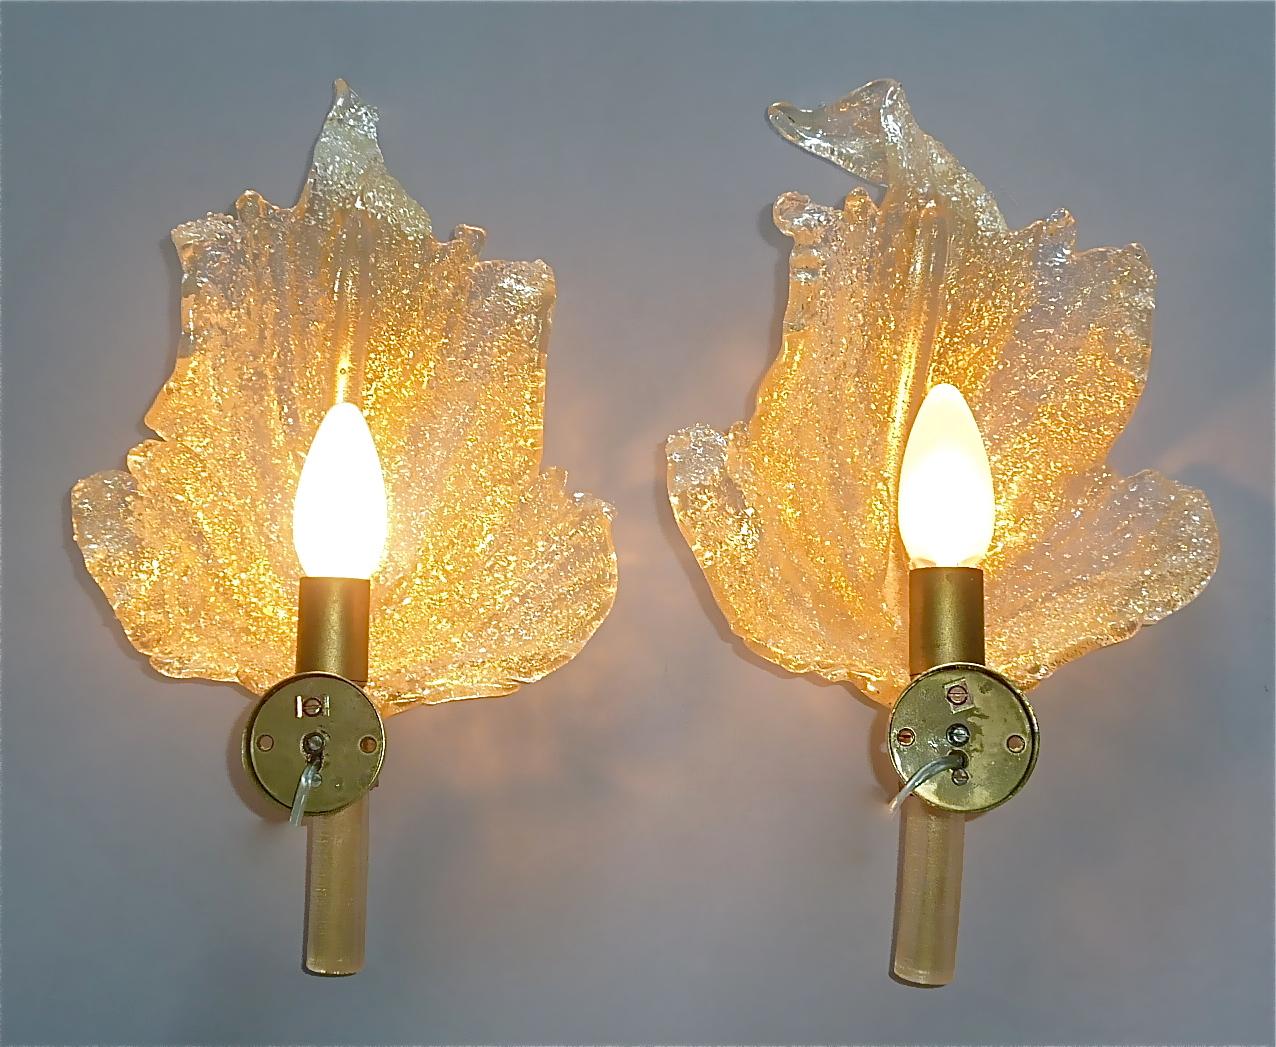 Large Signed Pair Barovier & Toso Leaf Sconces Italian Murano Glass Floral 1970s For Sale 8